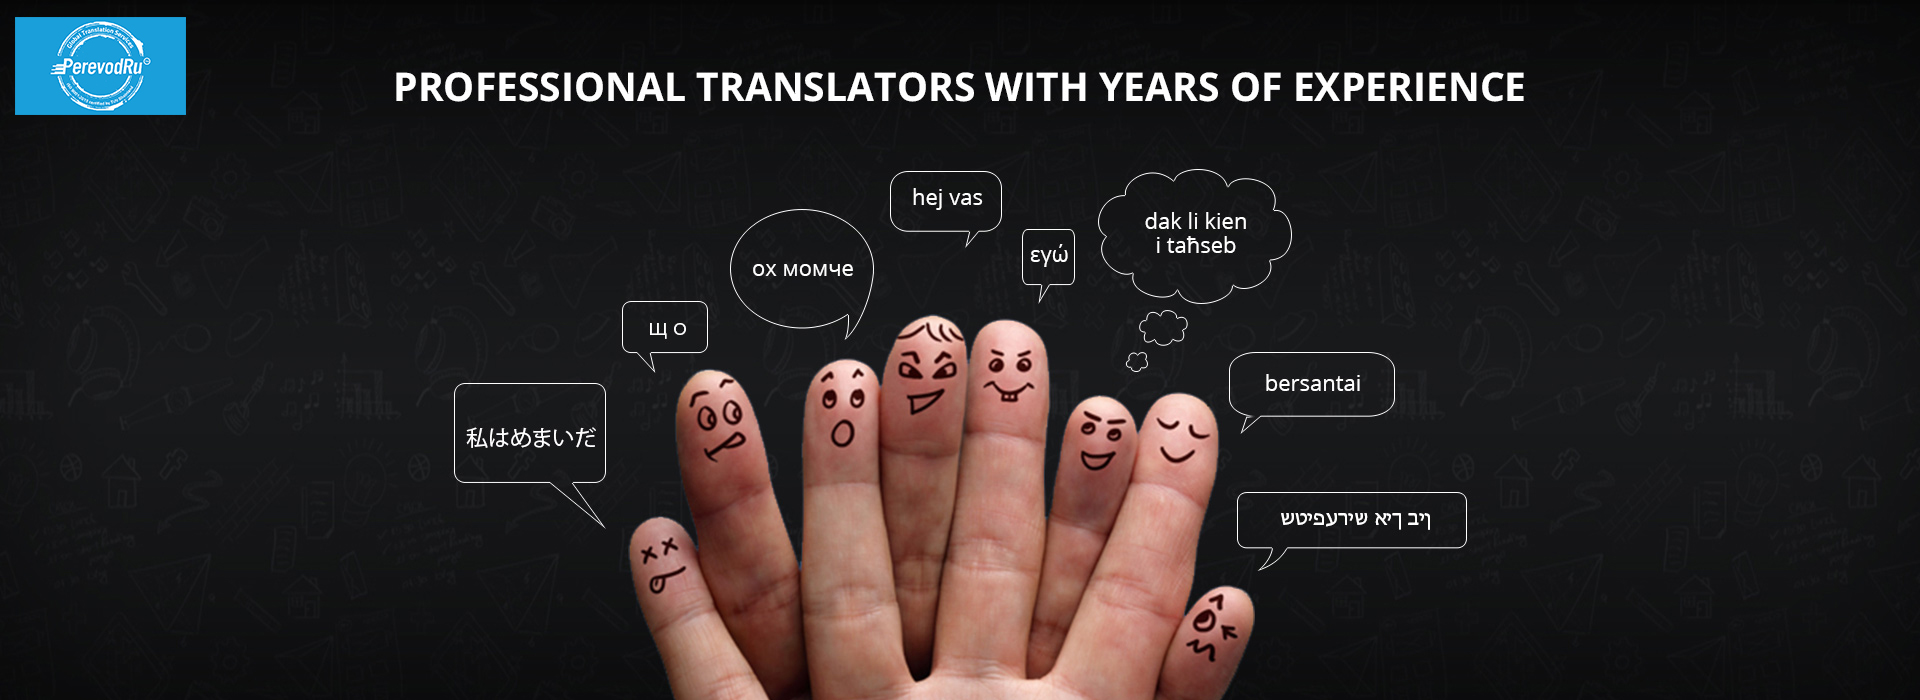 Professional translators with years of experience